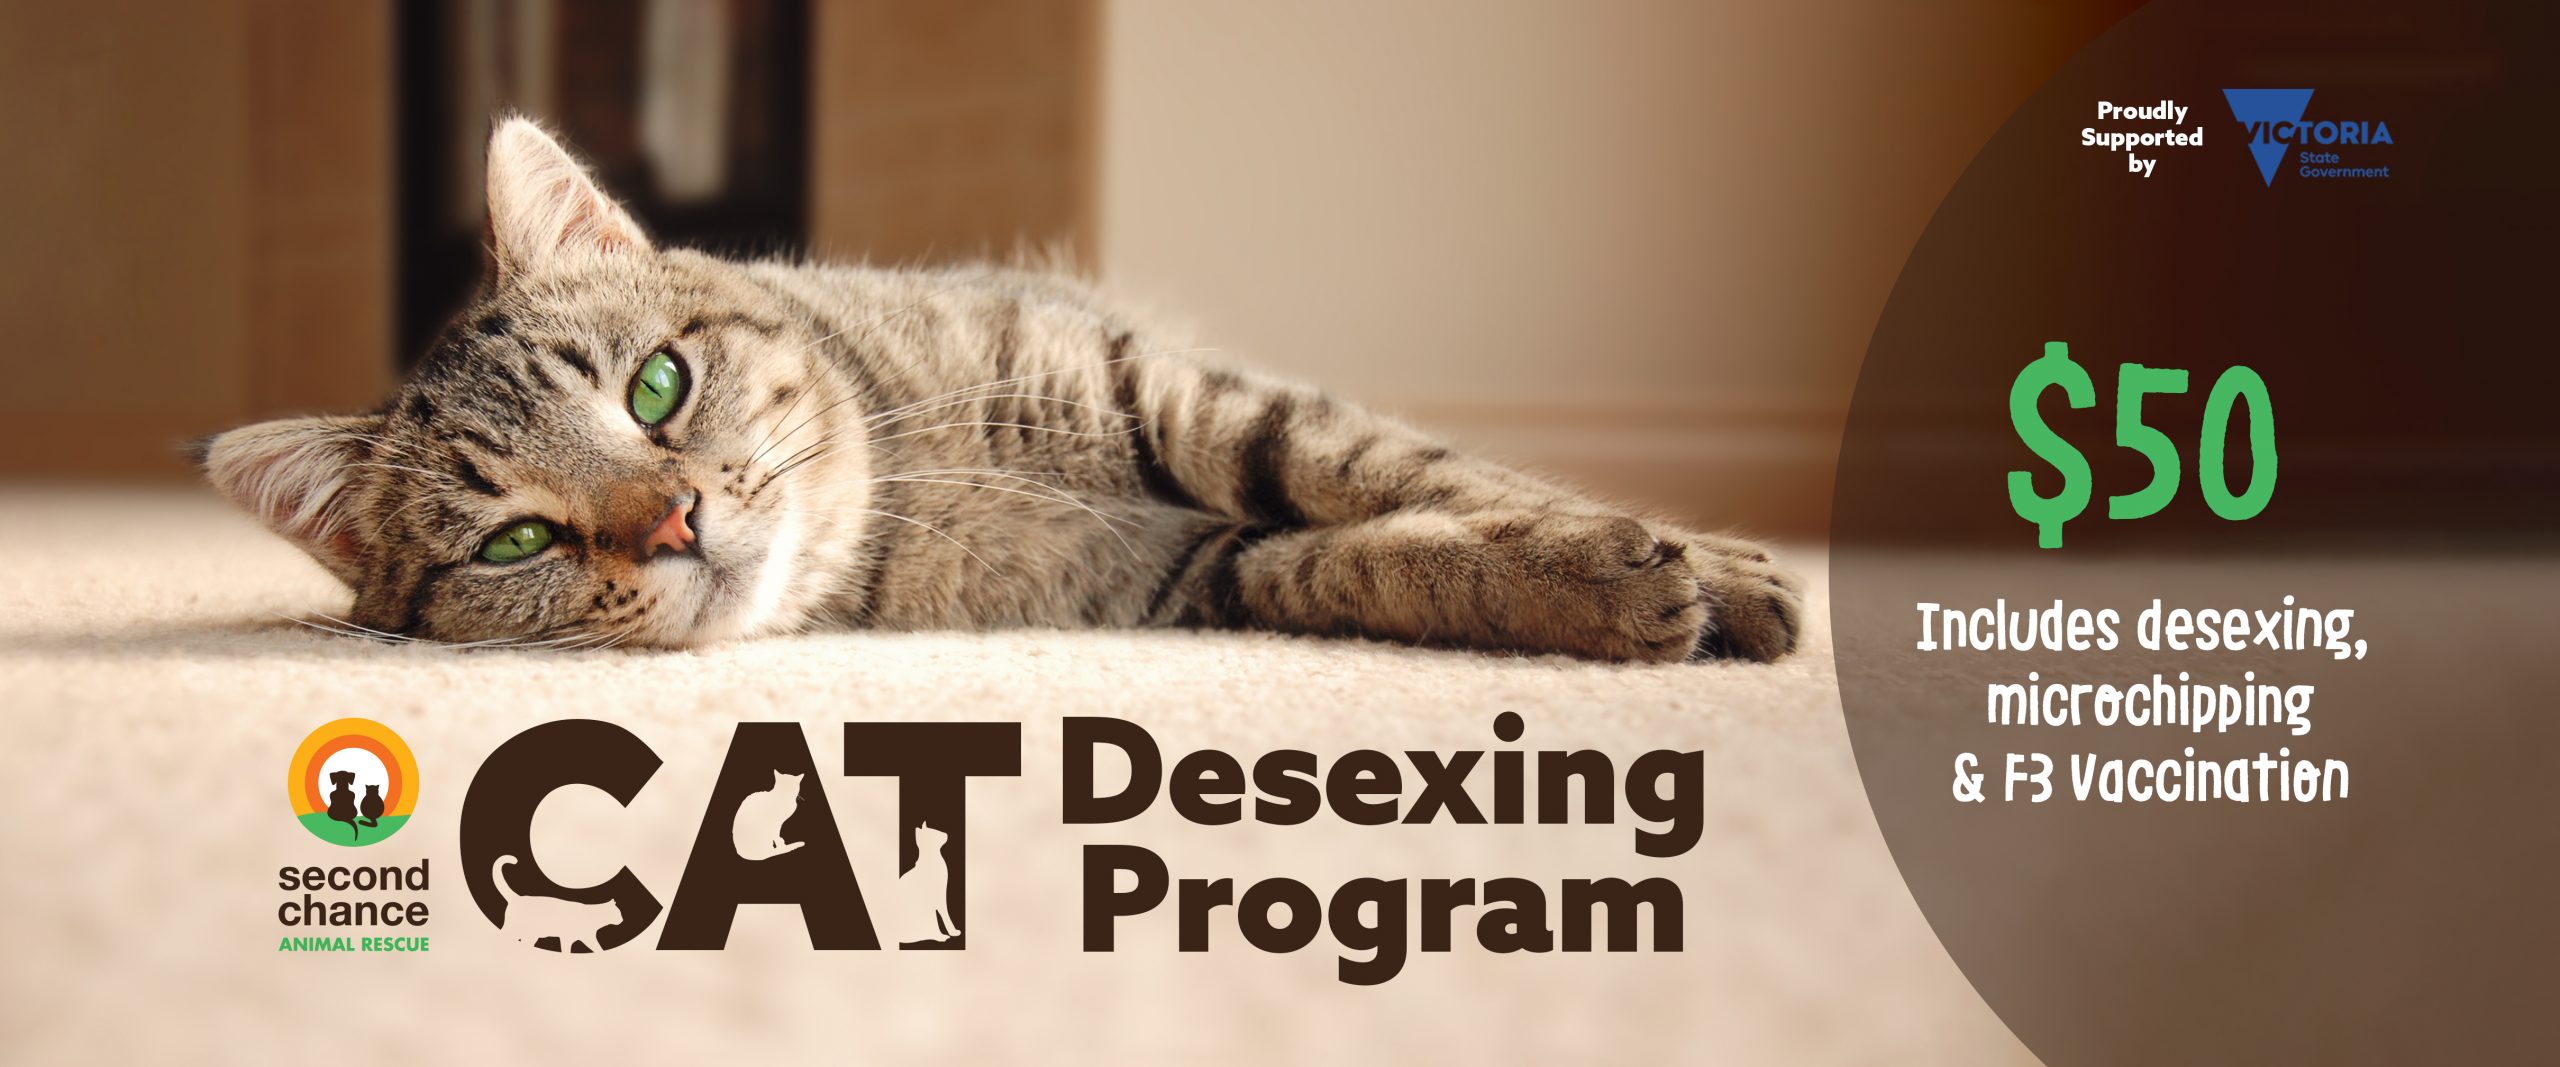 Cat Desexing Program - Second Chance Animal Rescue